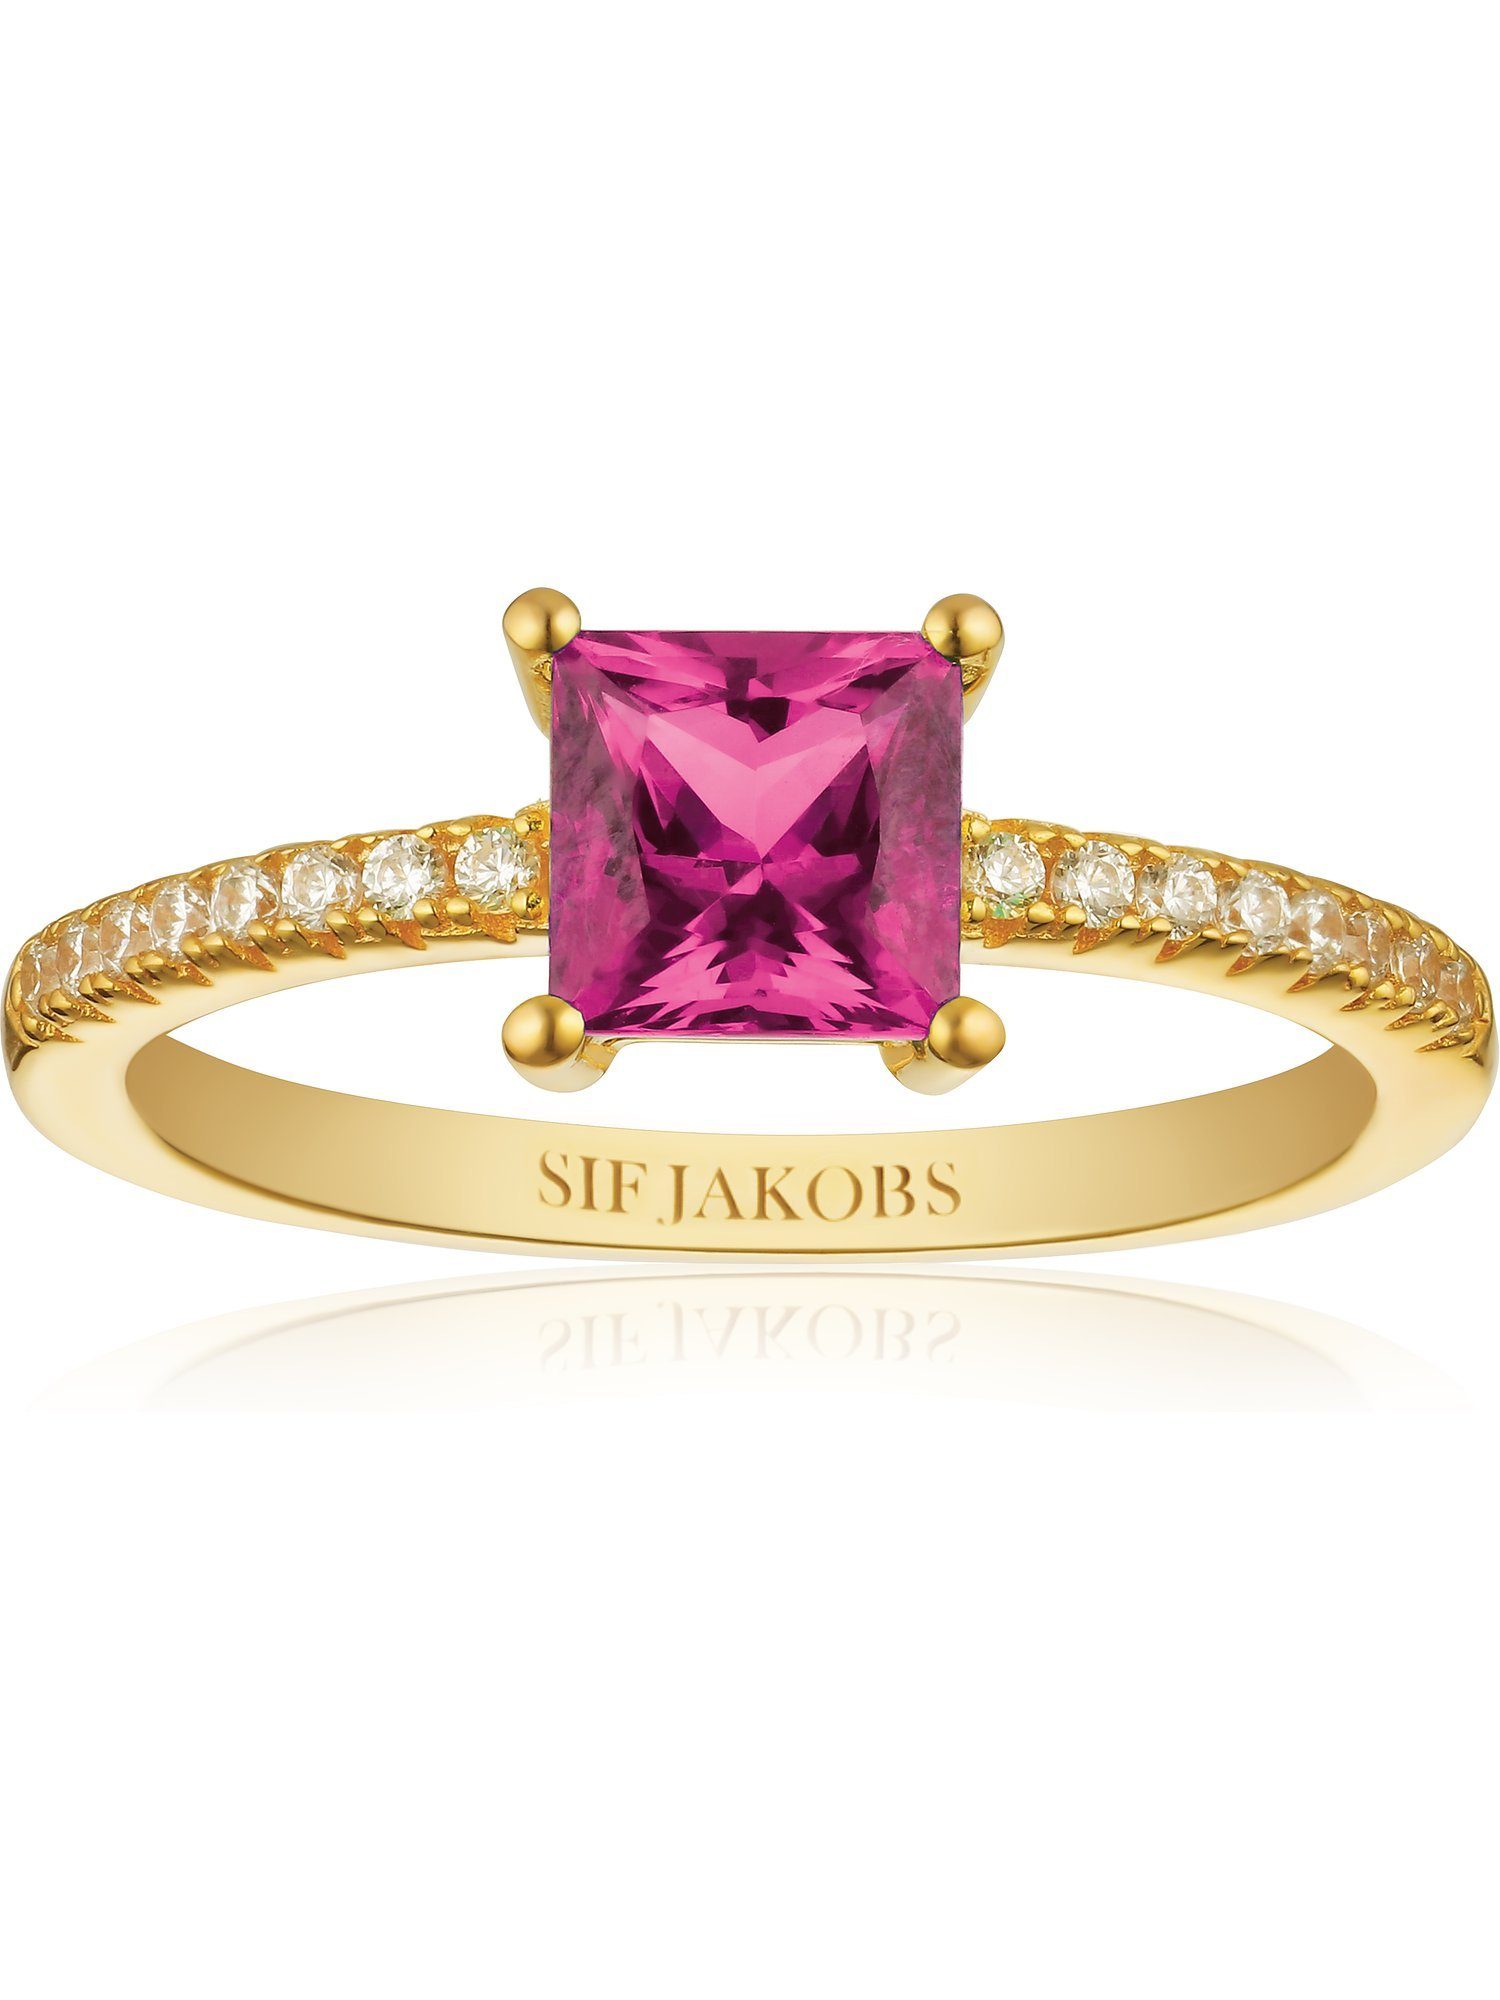 Jakobs rosa Sif Silberring gold, Jewellery